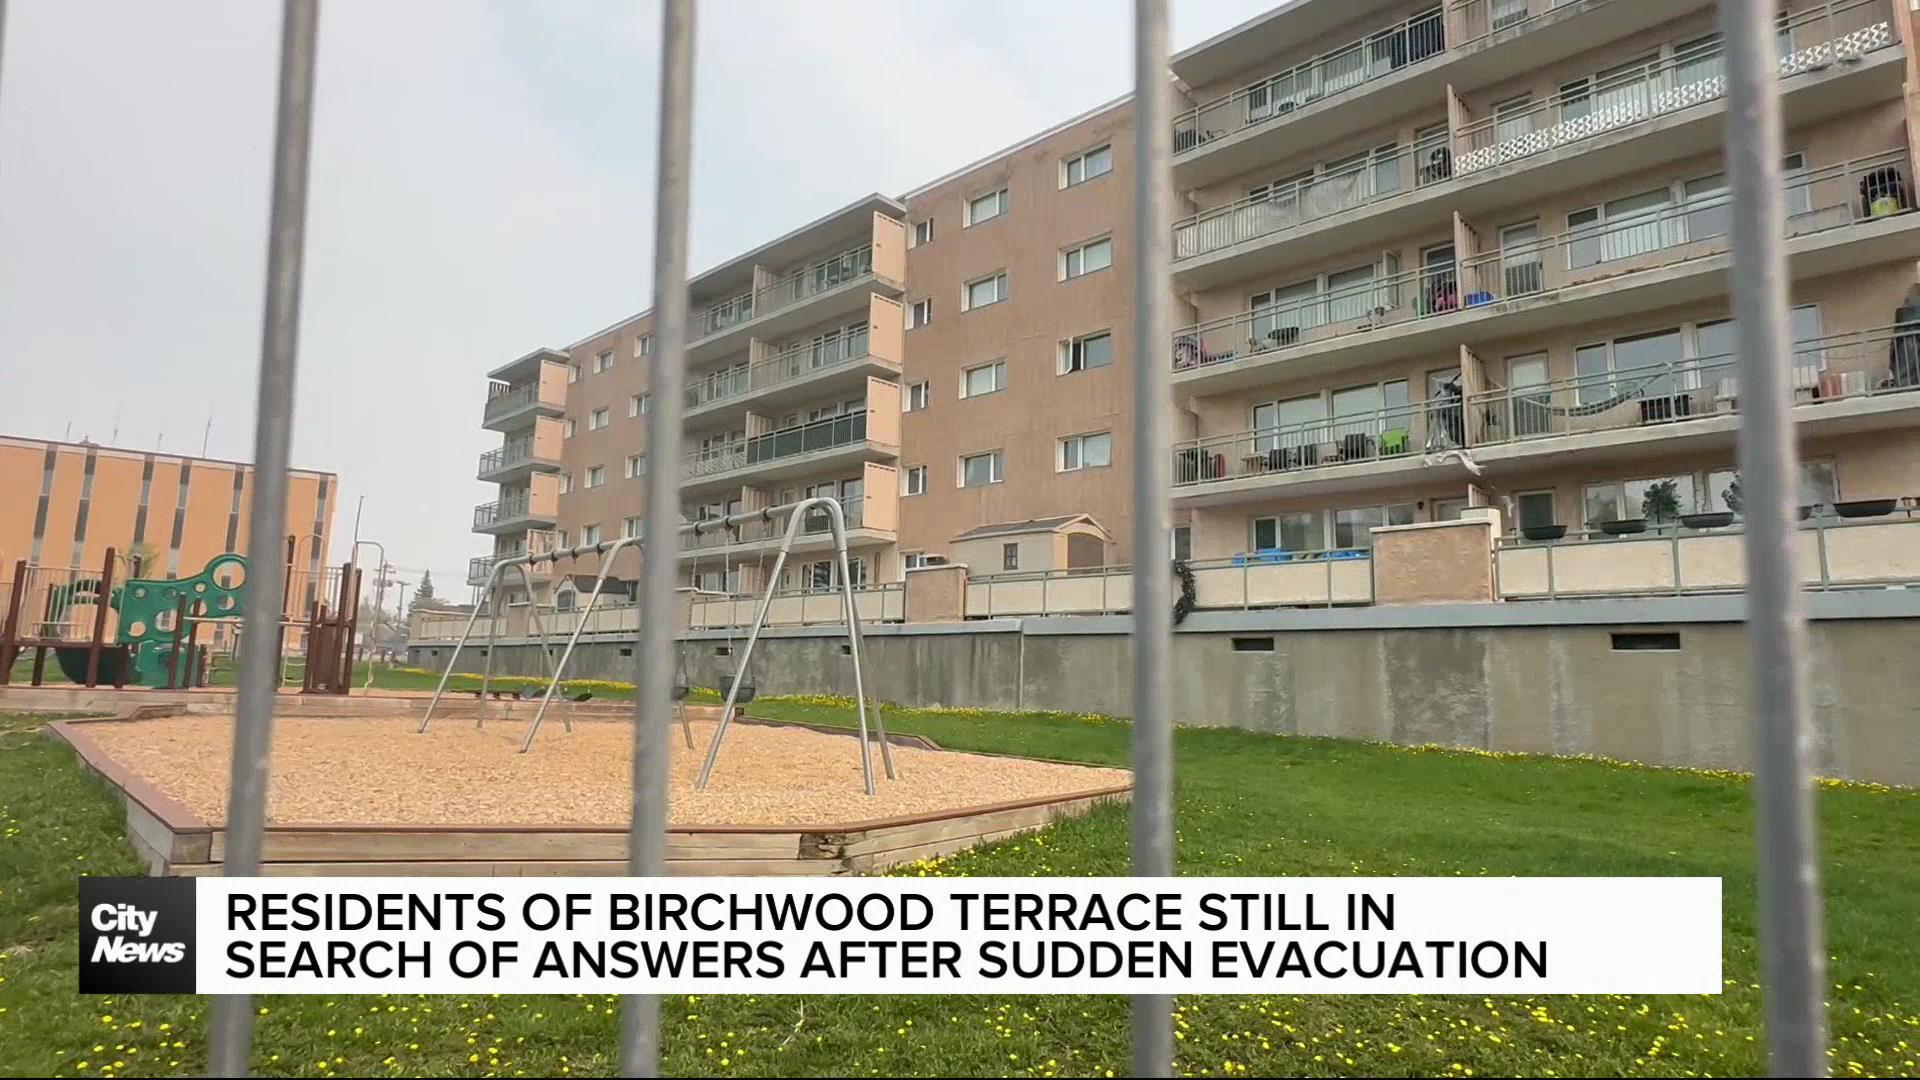 Residents of Birchwood Terrace still in search for answers after sudden evacuation